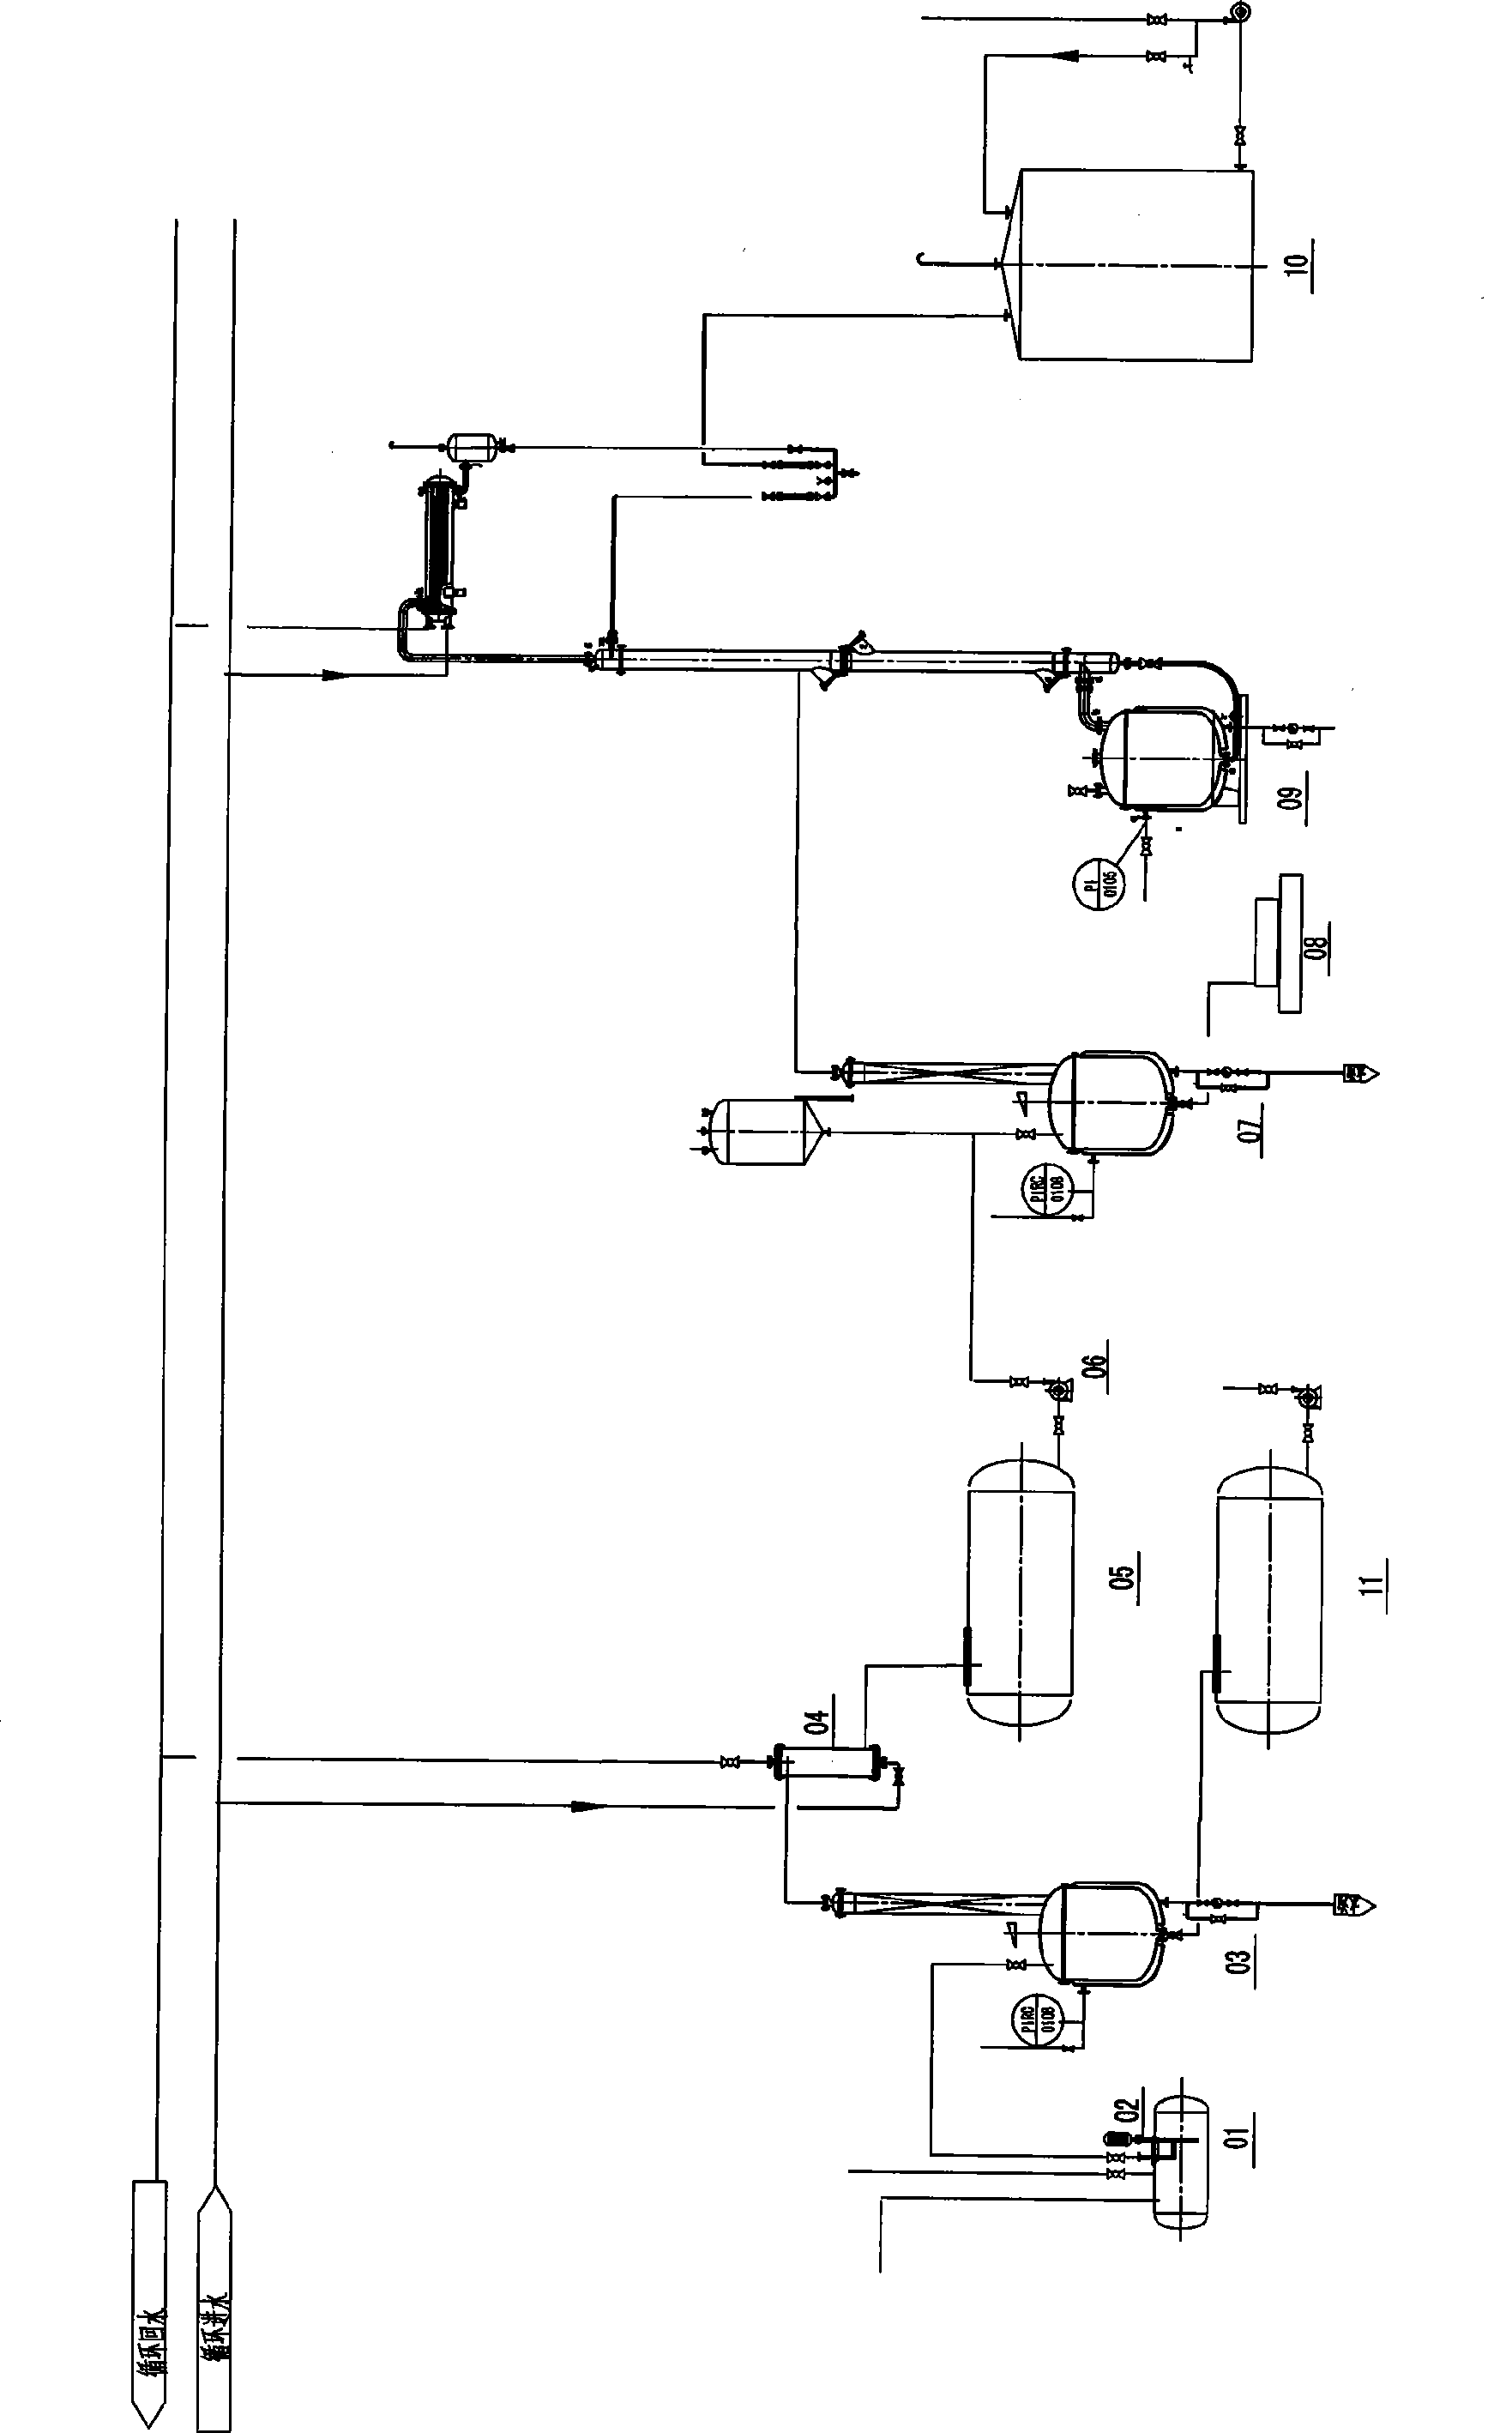 Comprehensive processing method and apparatus for mother solution in production of glucurolactone